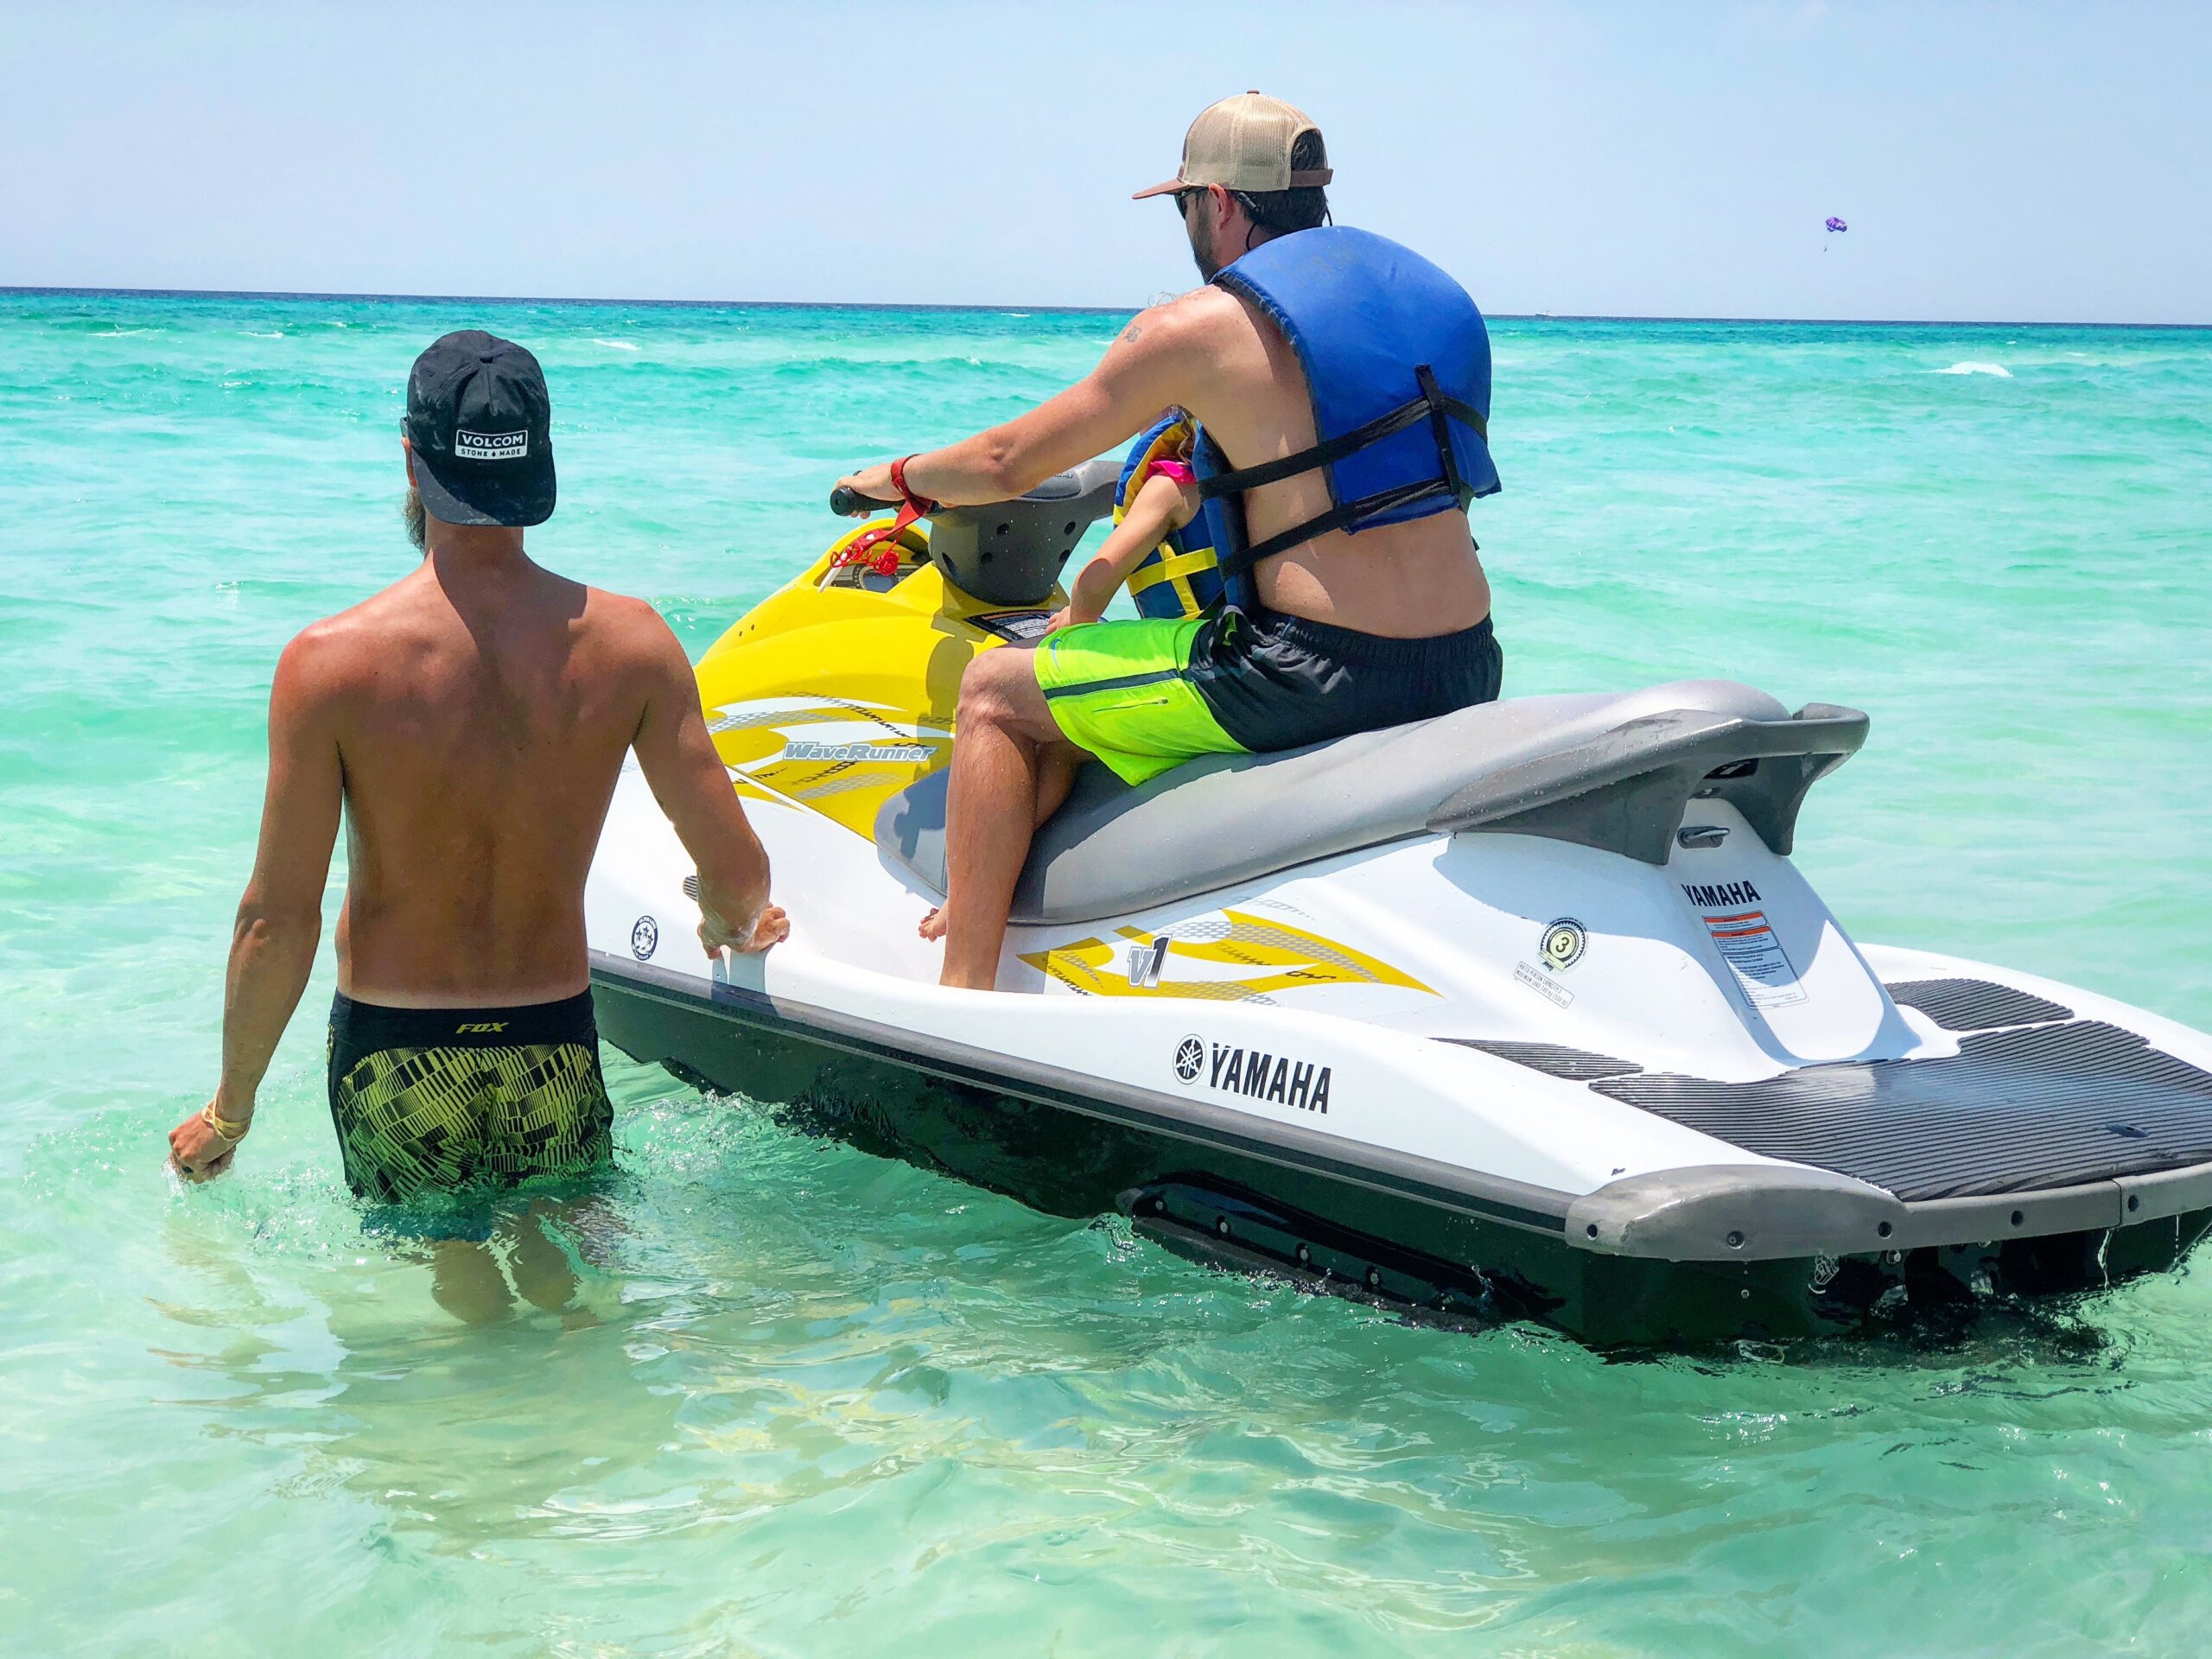 Where Can One Rent Jet Skis In Panama City Beach?